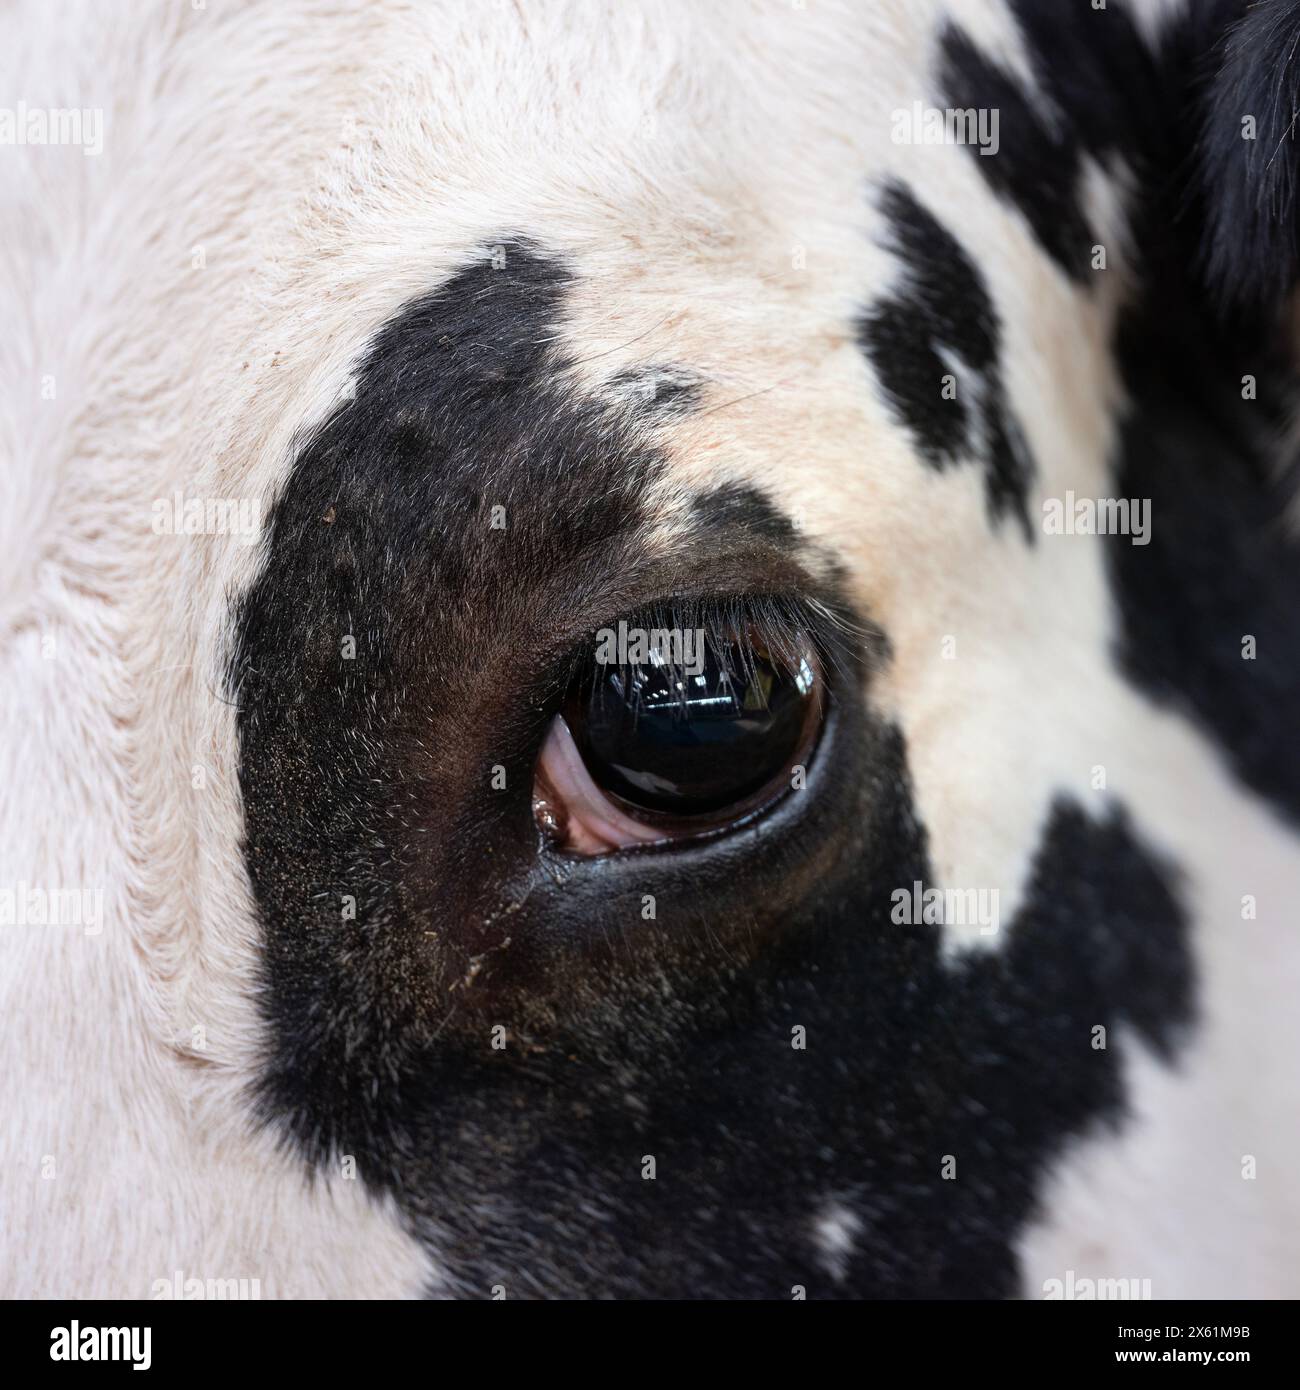 closeup of cow's eye of black and white spotted cow with dark eyelashes Stock Photo